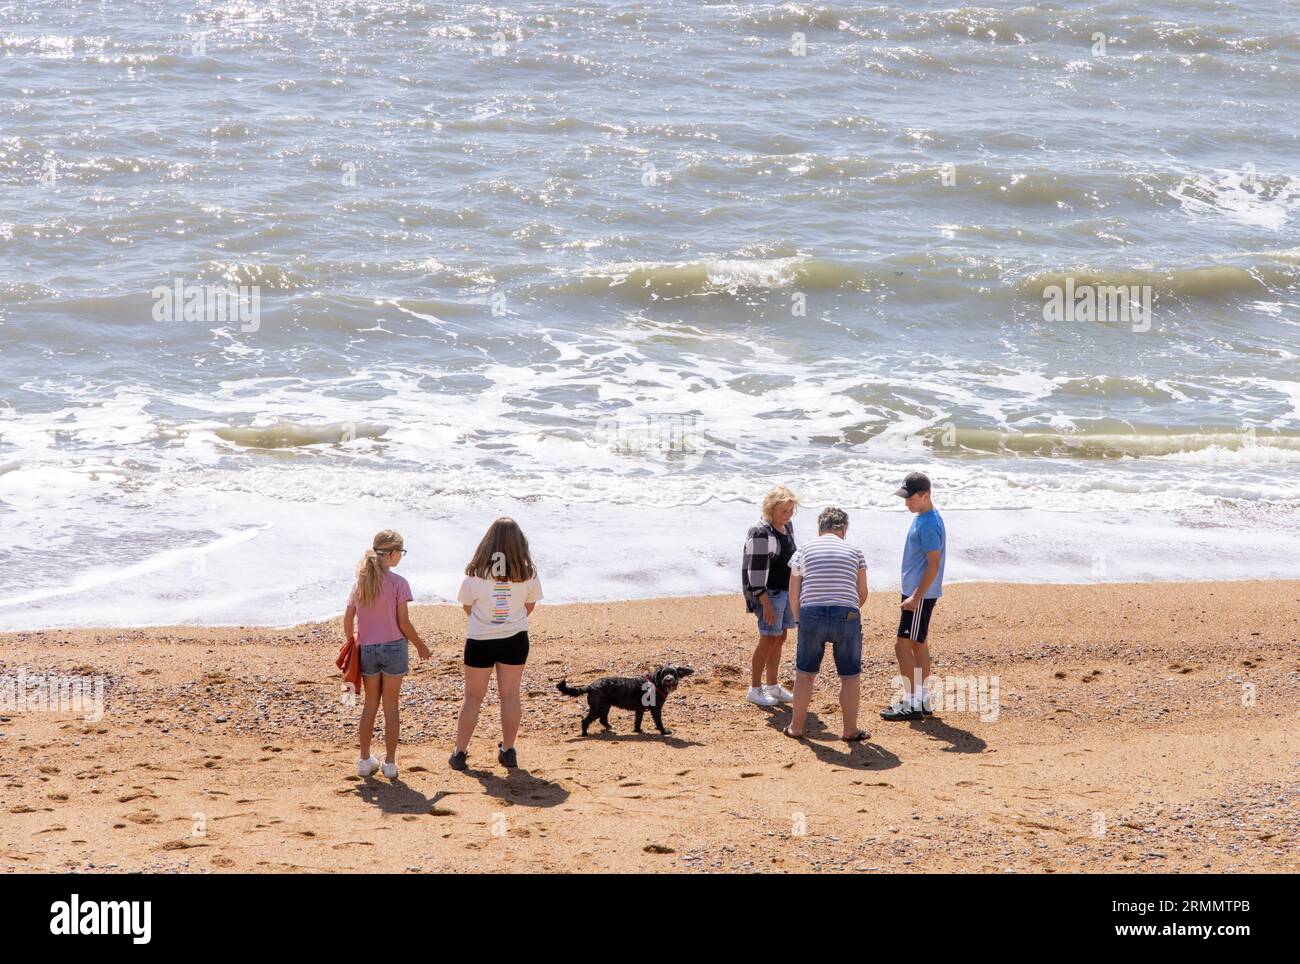 UK Beach summer family. A family with their dog at the water's edge, Hive Bay beach, Hive Bay Dorset UK. UK lifestyle staycation. Stock Photo